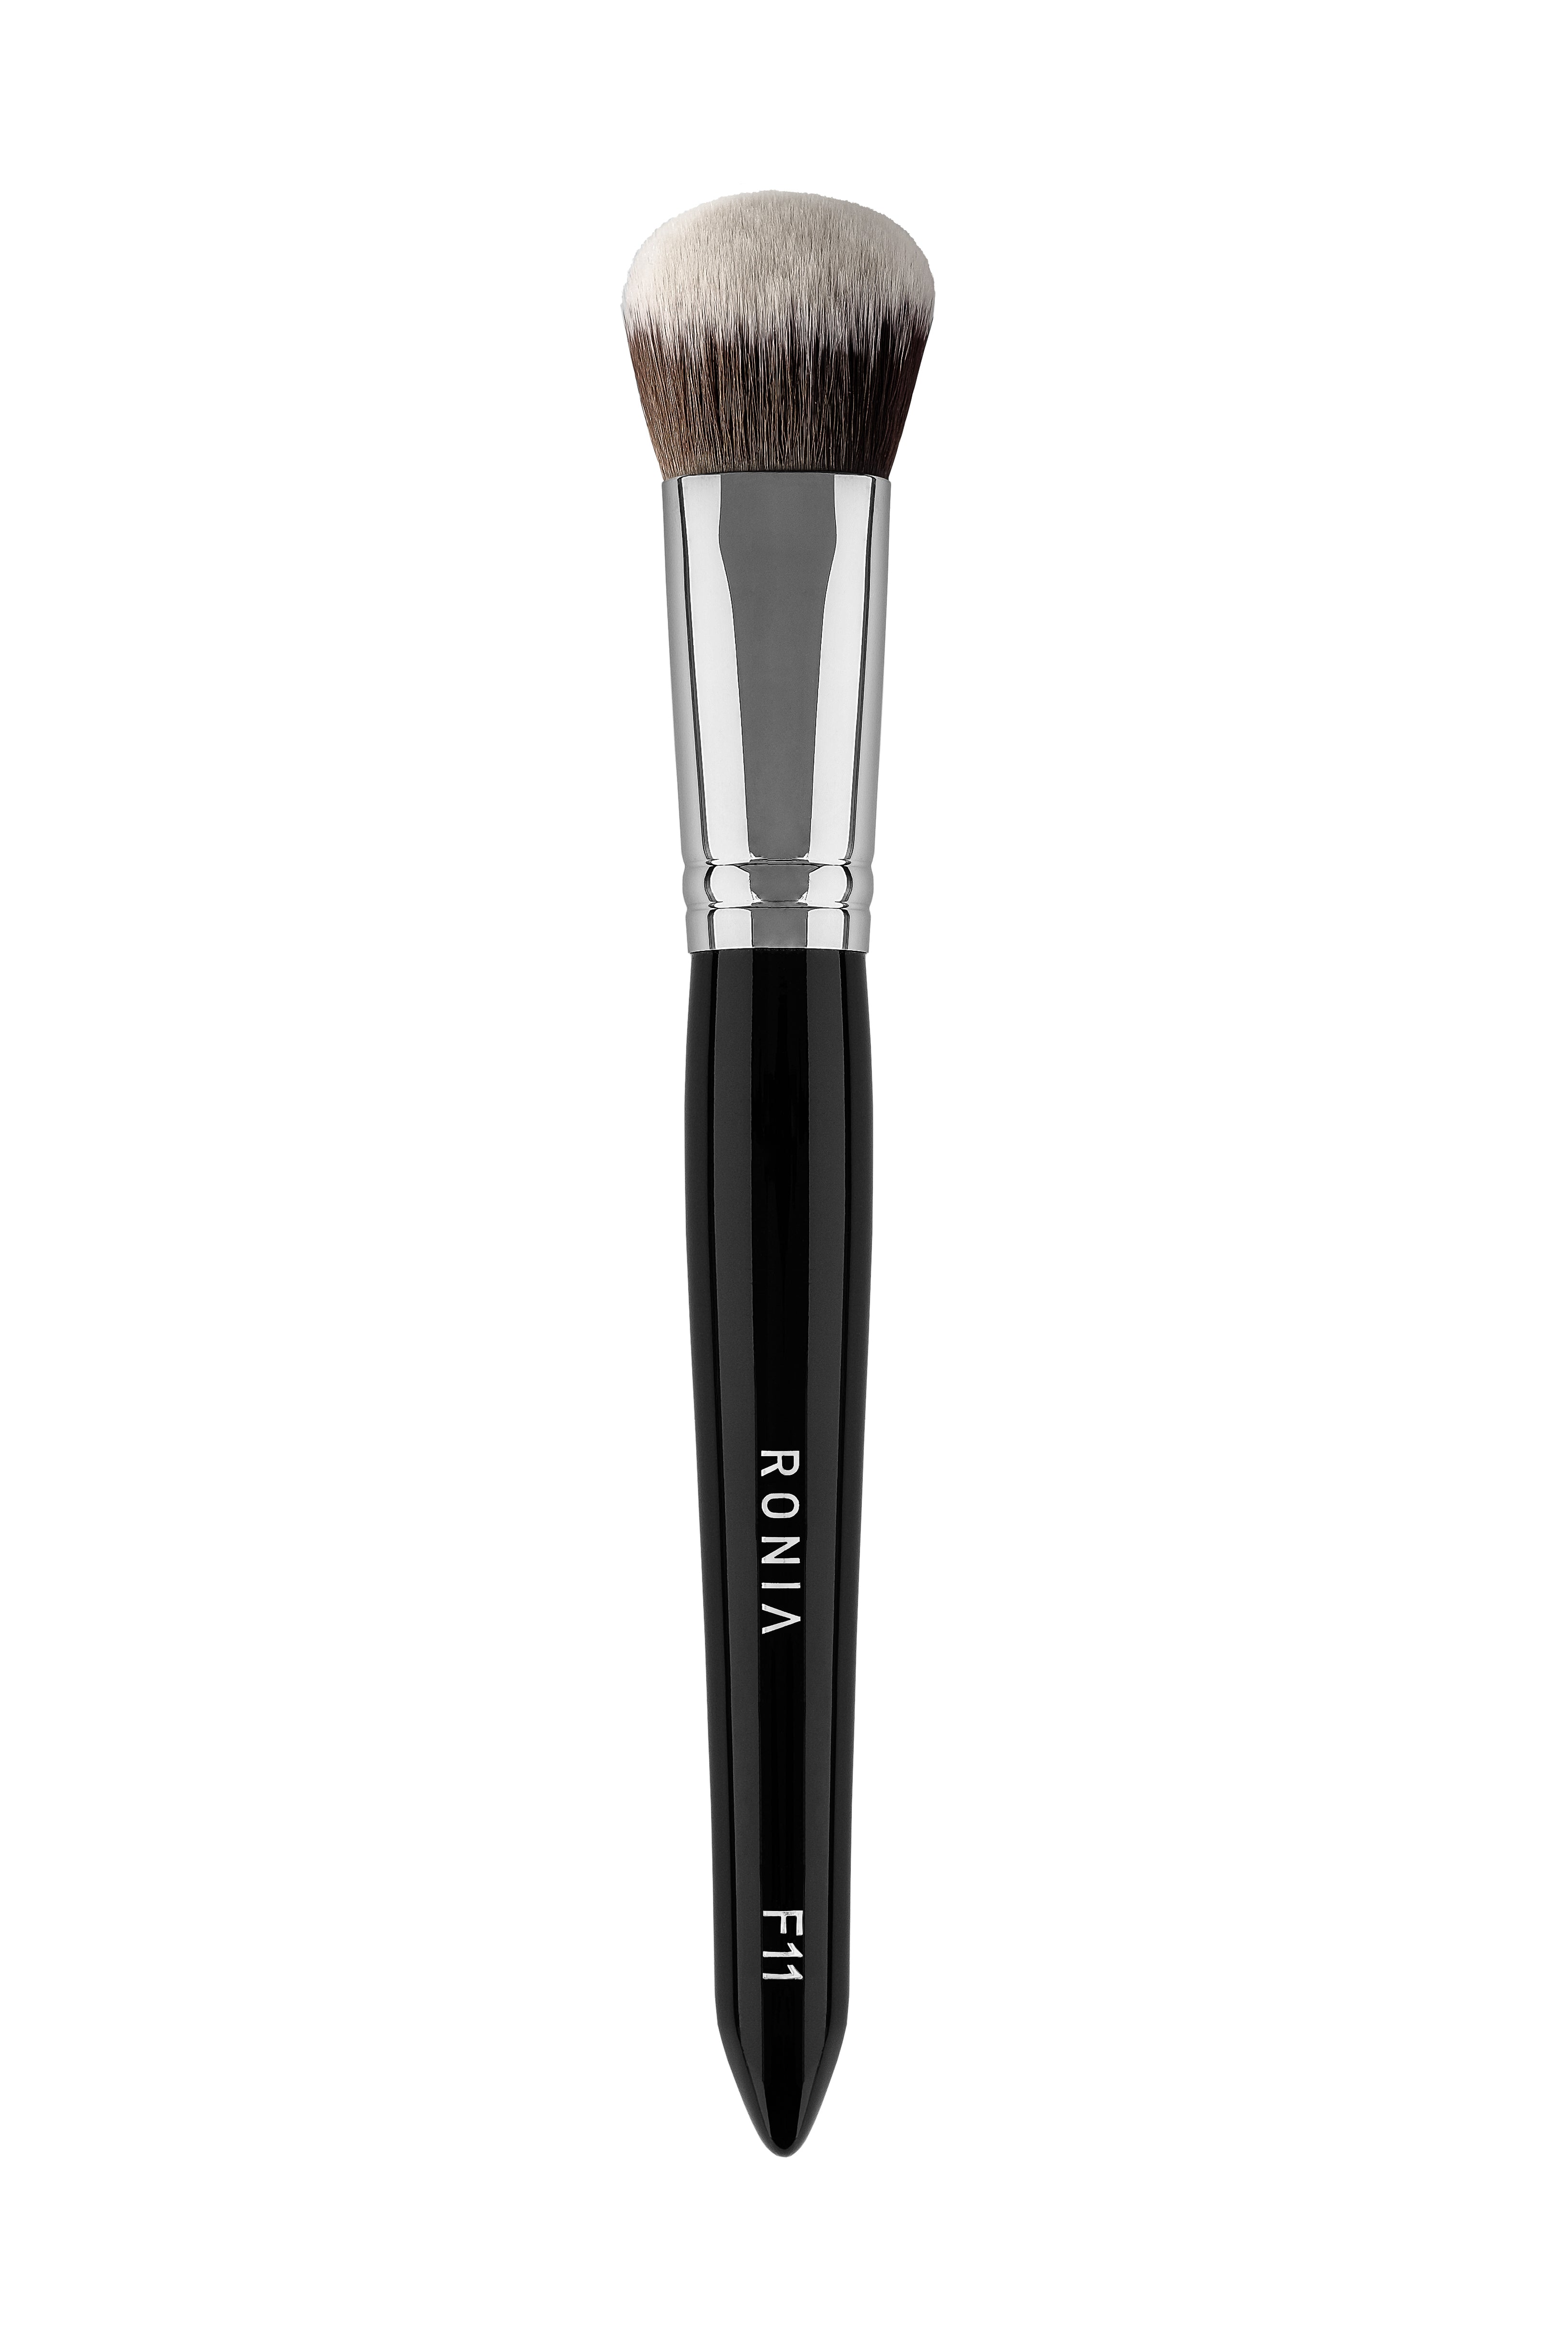 FACE BRUSHES - TOP 5 BEST SELLERS